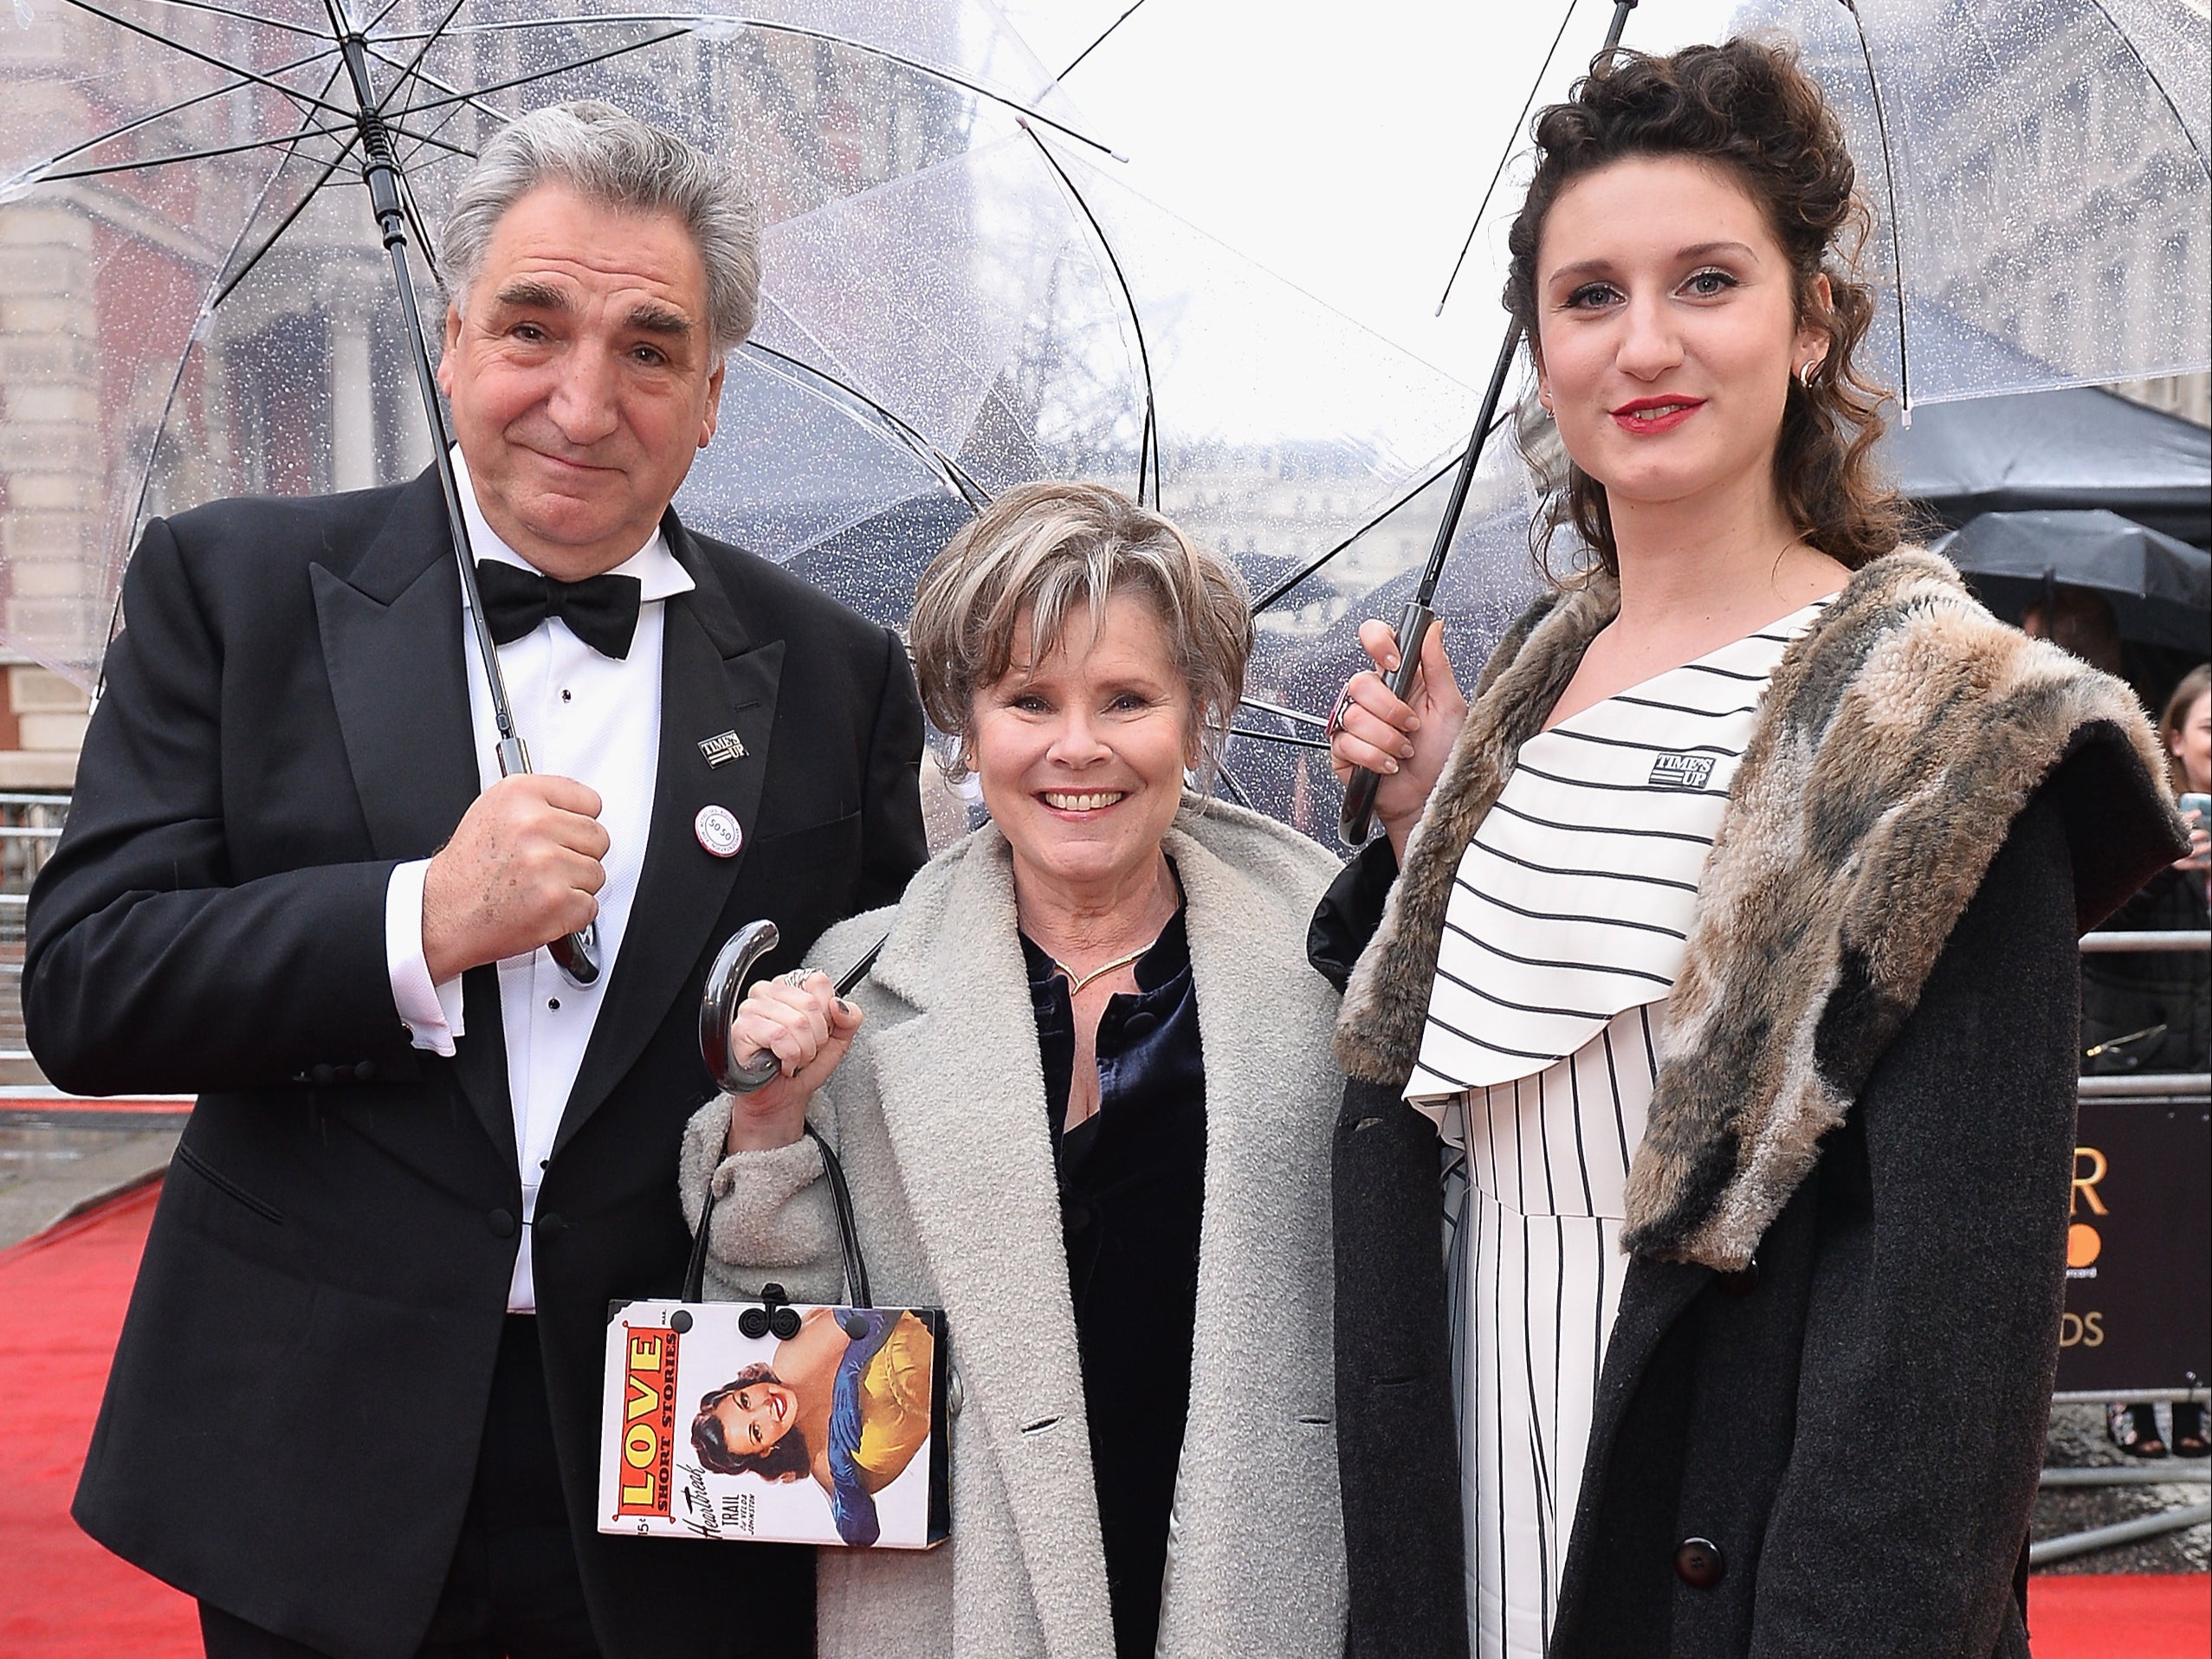 Imelda Staunton, Jim Carter and their daughter Bessie Carter at the Olivier Awards in 2018